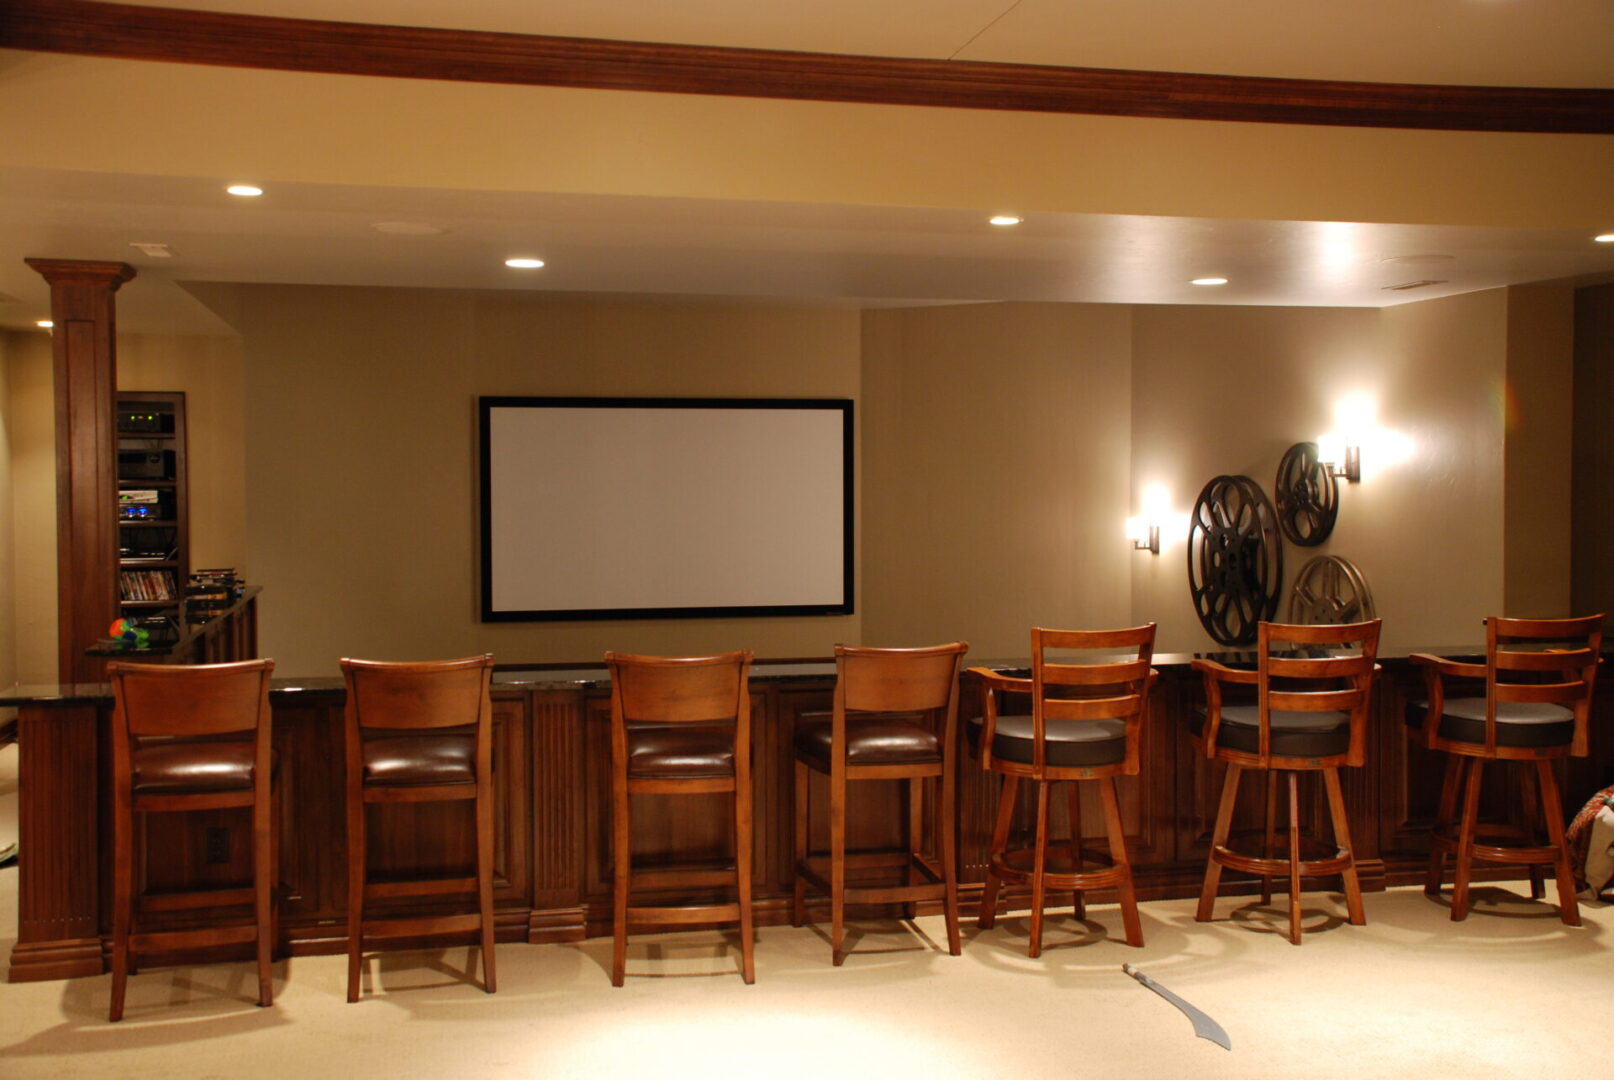 View of a home theater from the bar